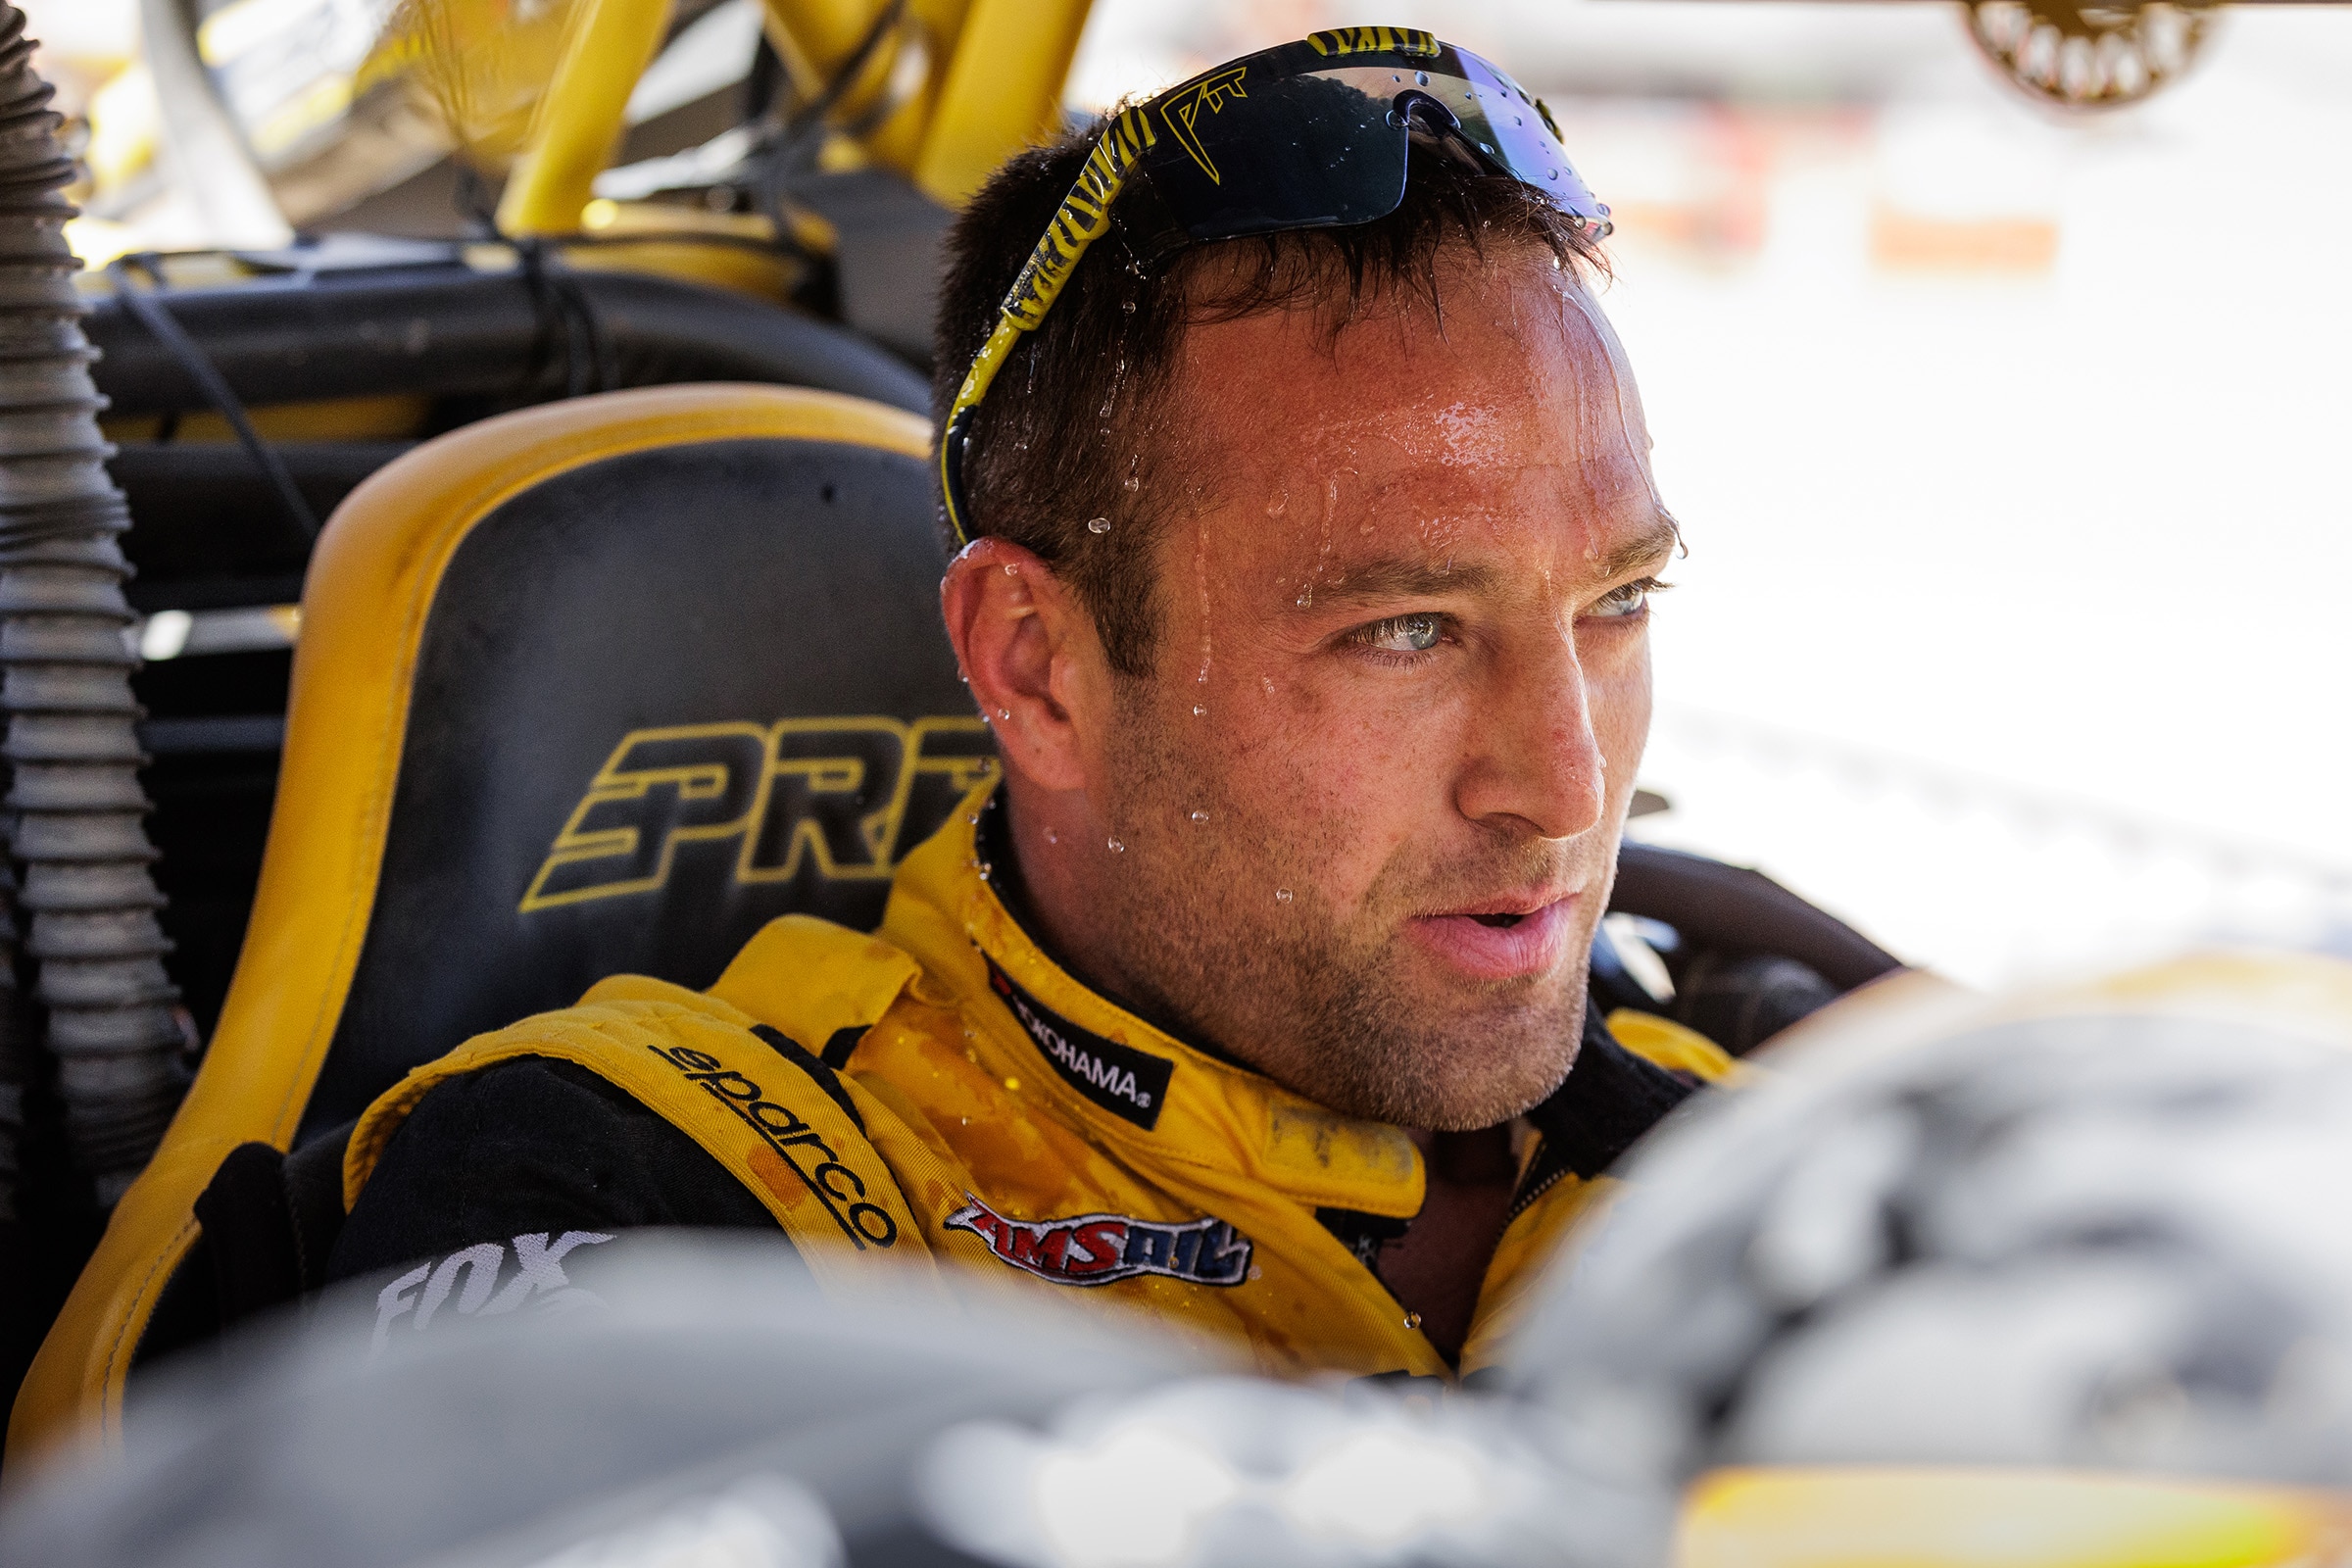 Kyle Chaney, Can-Am Off-Road racer, behind the wheel of his SxS vehicle at the 2024 King of the Hammers event